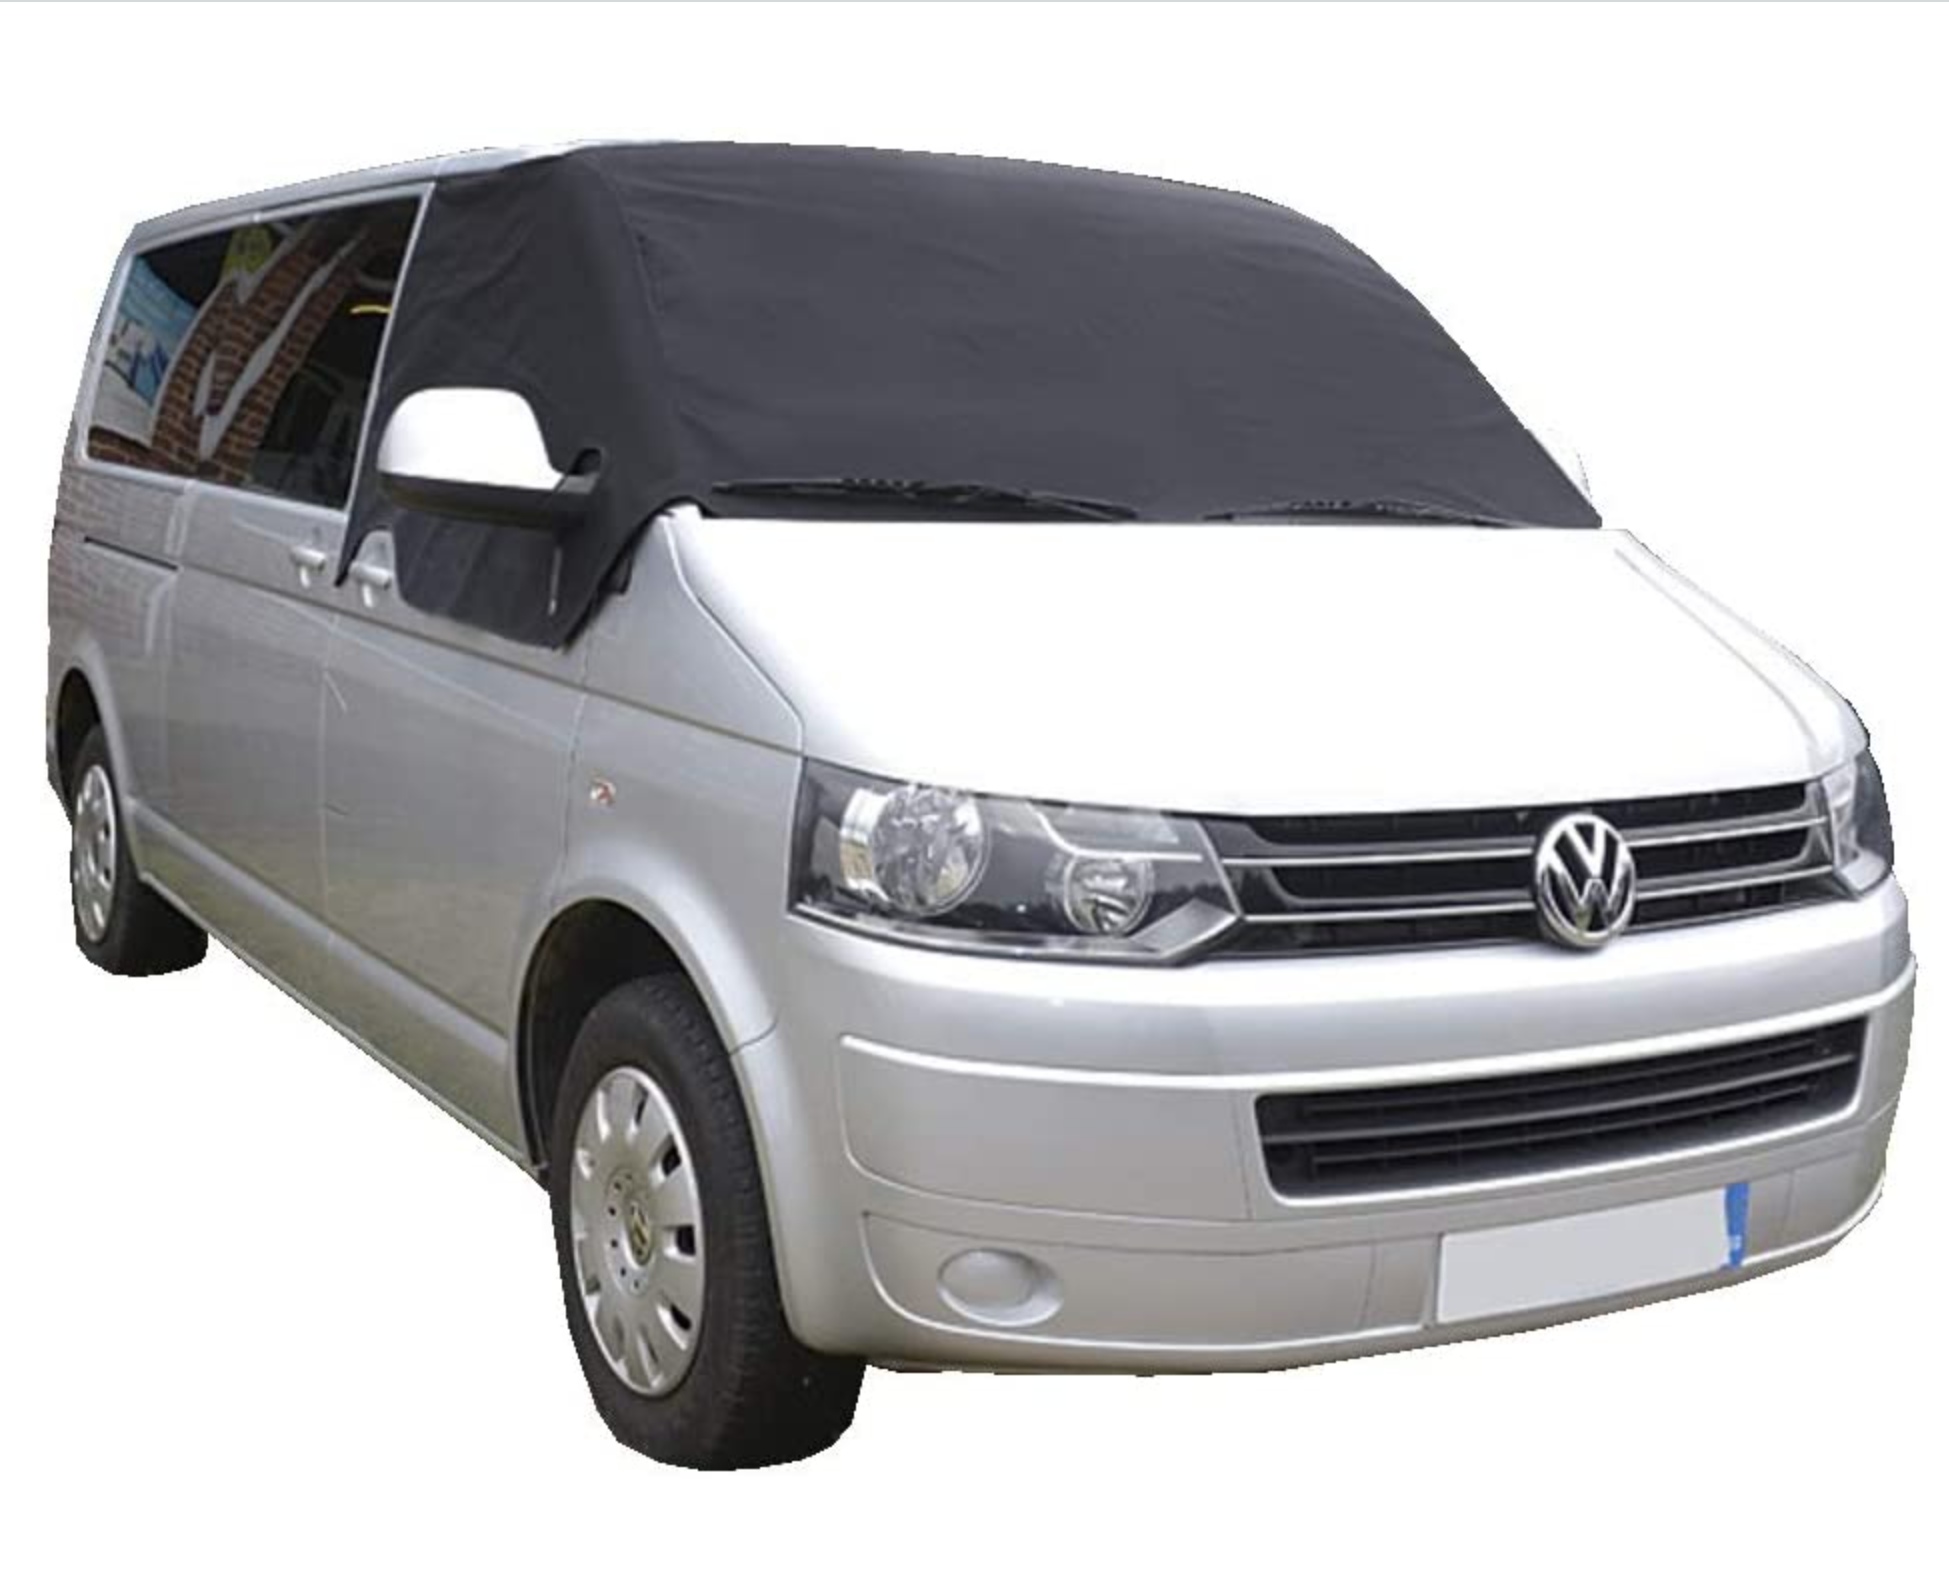 FITS VW TRANSPORTER T5 Custom Covers  Luxury Front Windscreen Wrap Cover - BLACK